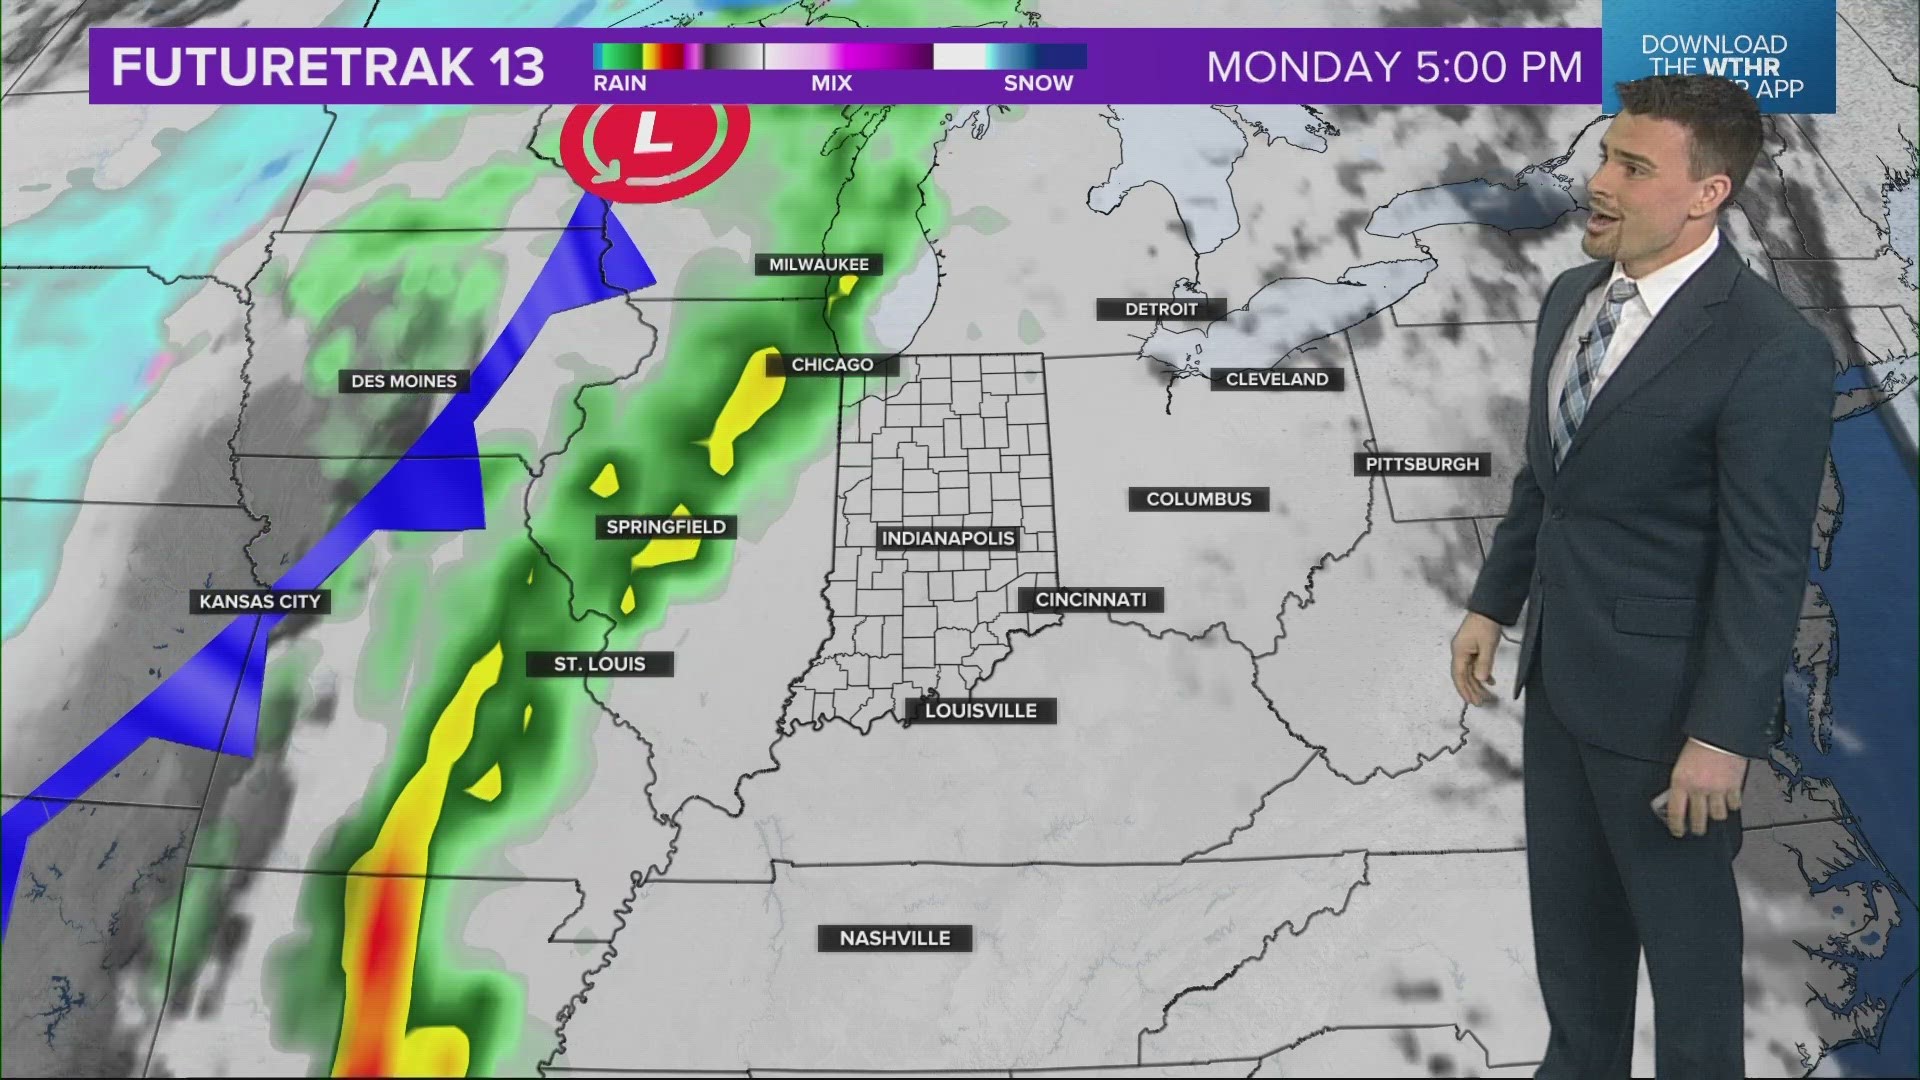 13News meteorologist Matt Standridge previews a slight warmup coming to central Indiana at the start of next week.